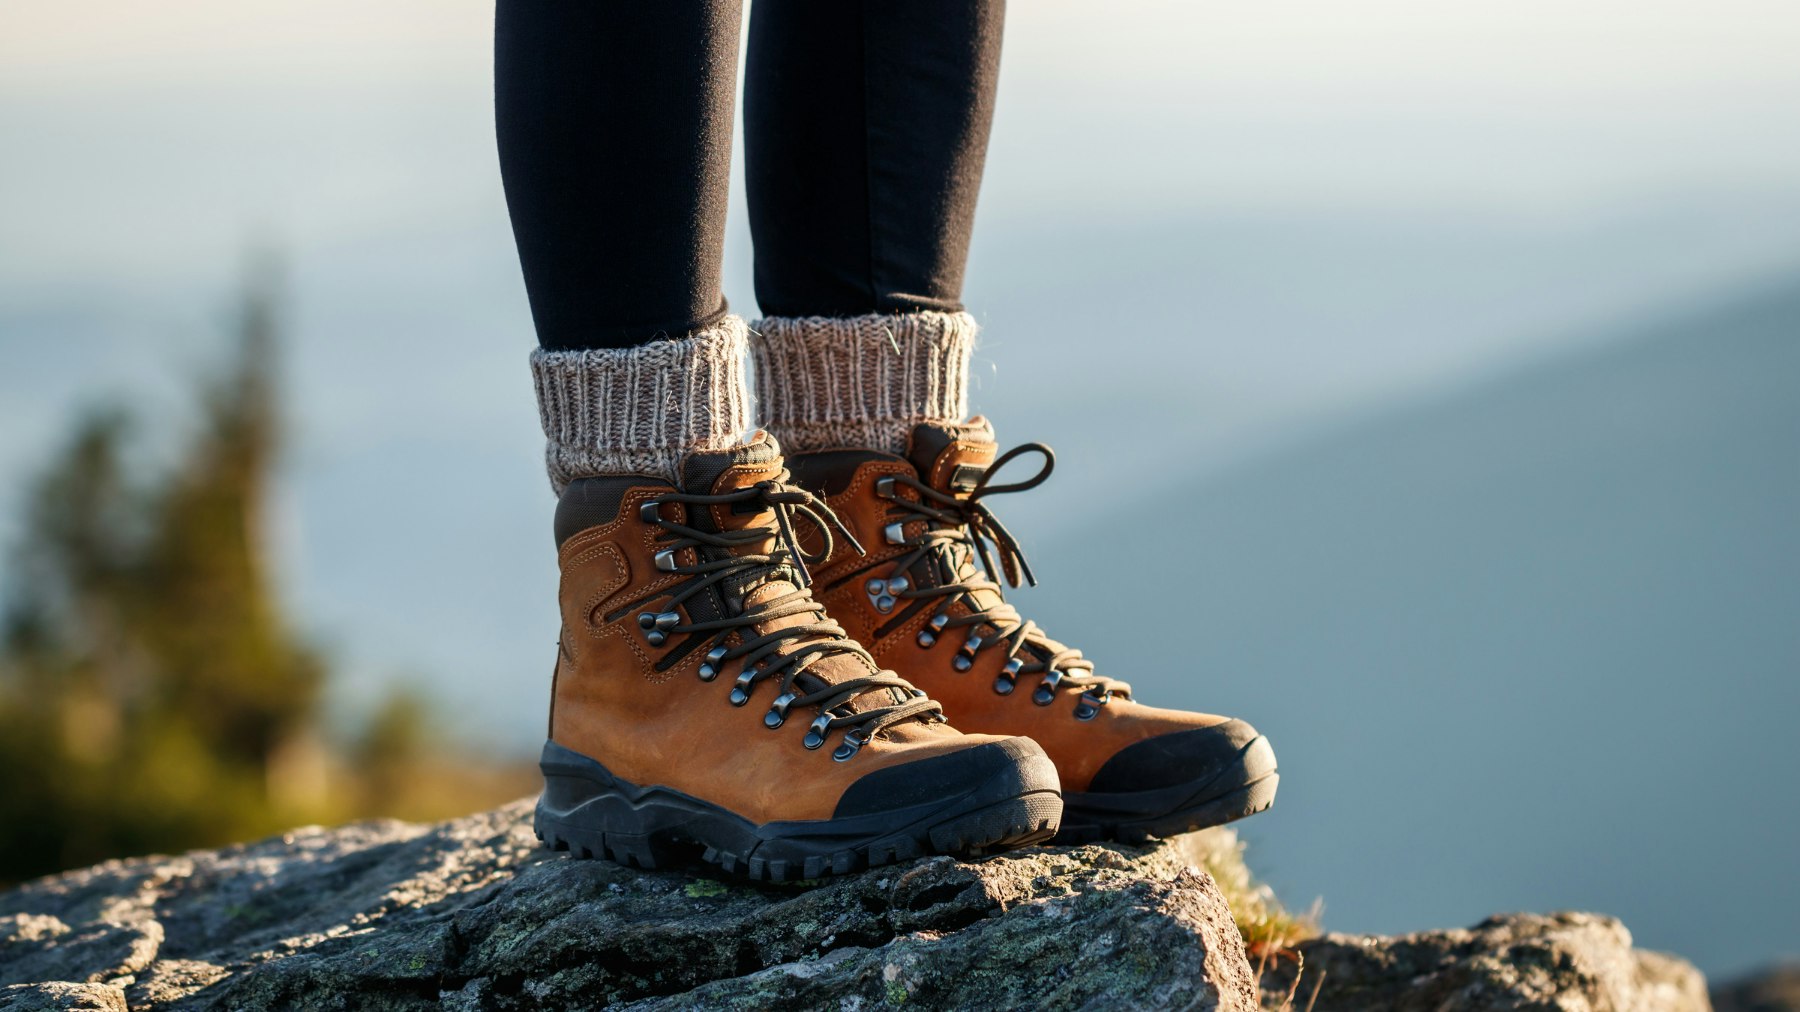 Stylish & Comfortable Trekking Outfits For Women